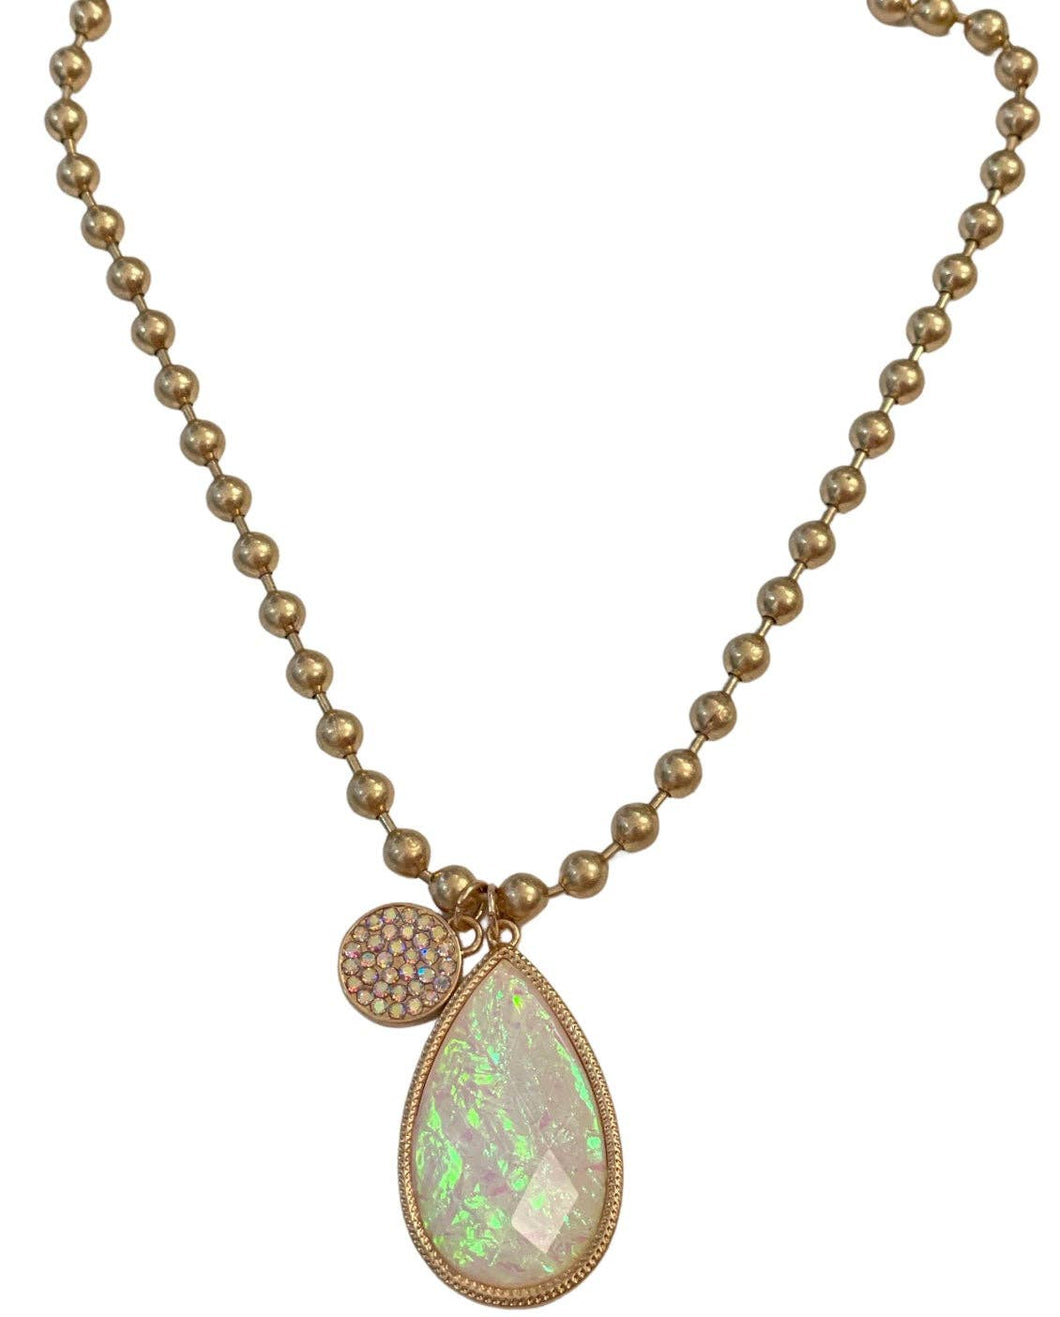 1CNC A274 * Gold ball chain necklace with irridescent acrylic teardrop and AB pave circle charm